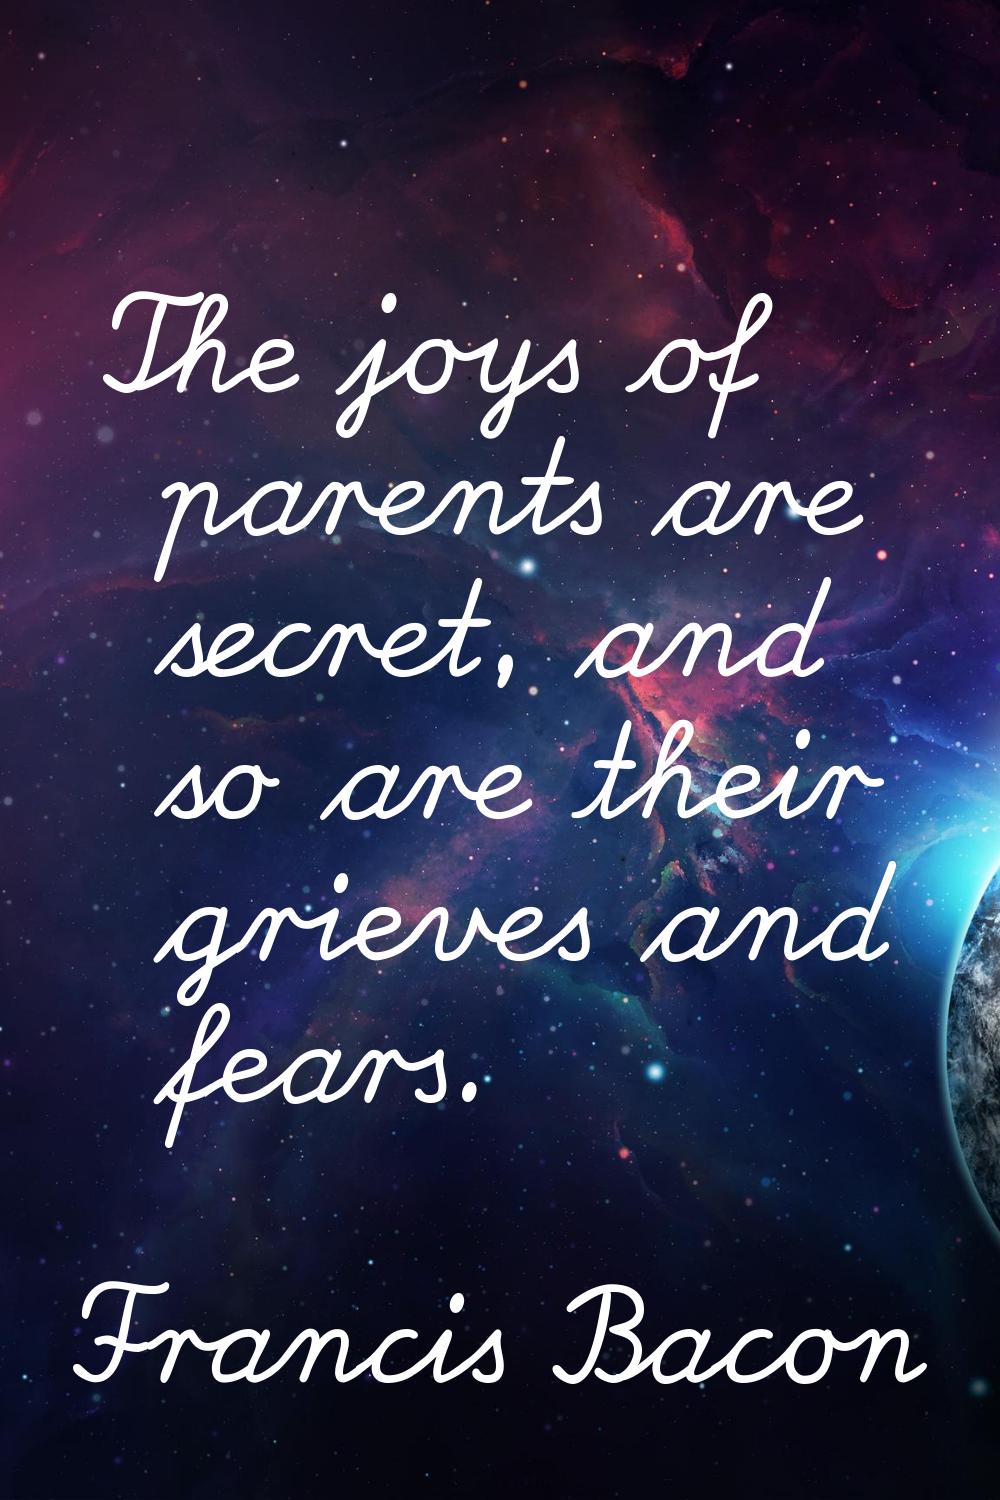 The joys of parents are secret, and so are their grieves and fears.